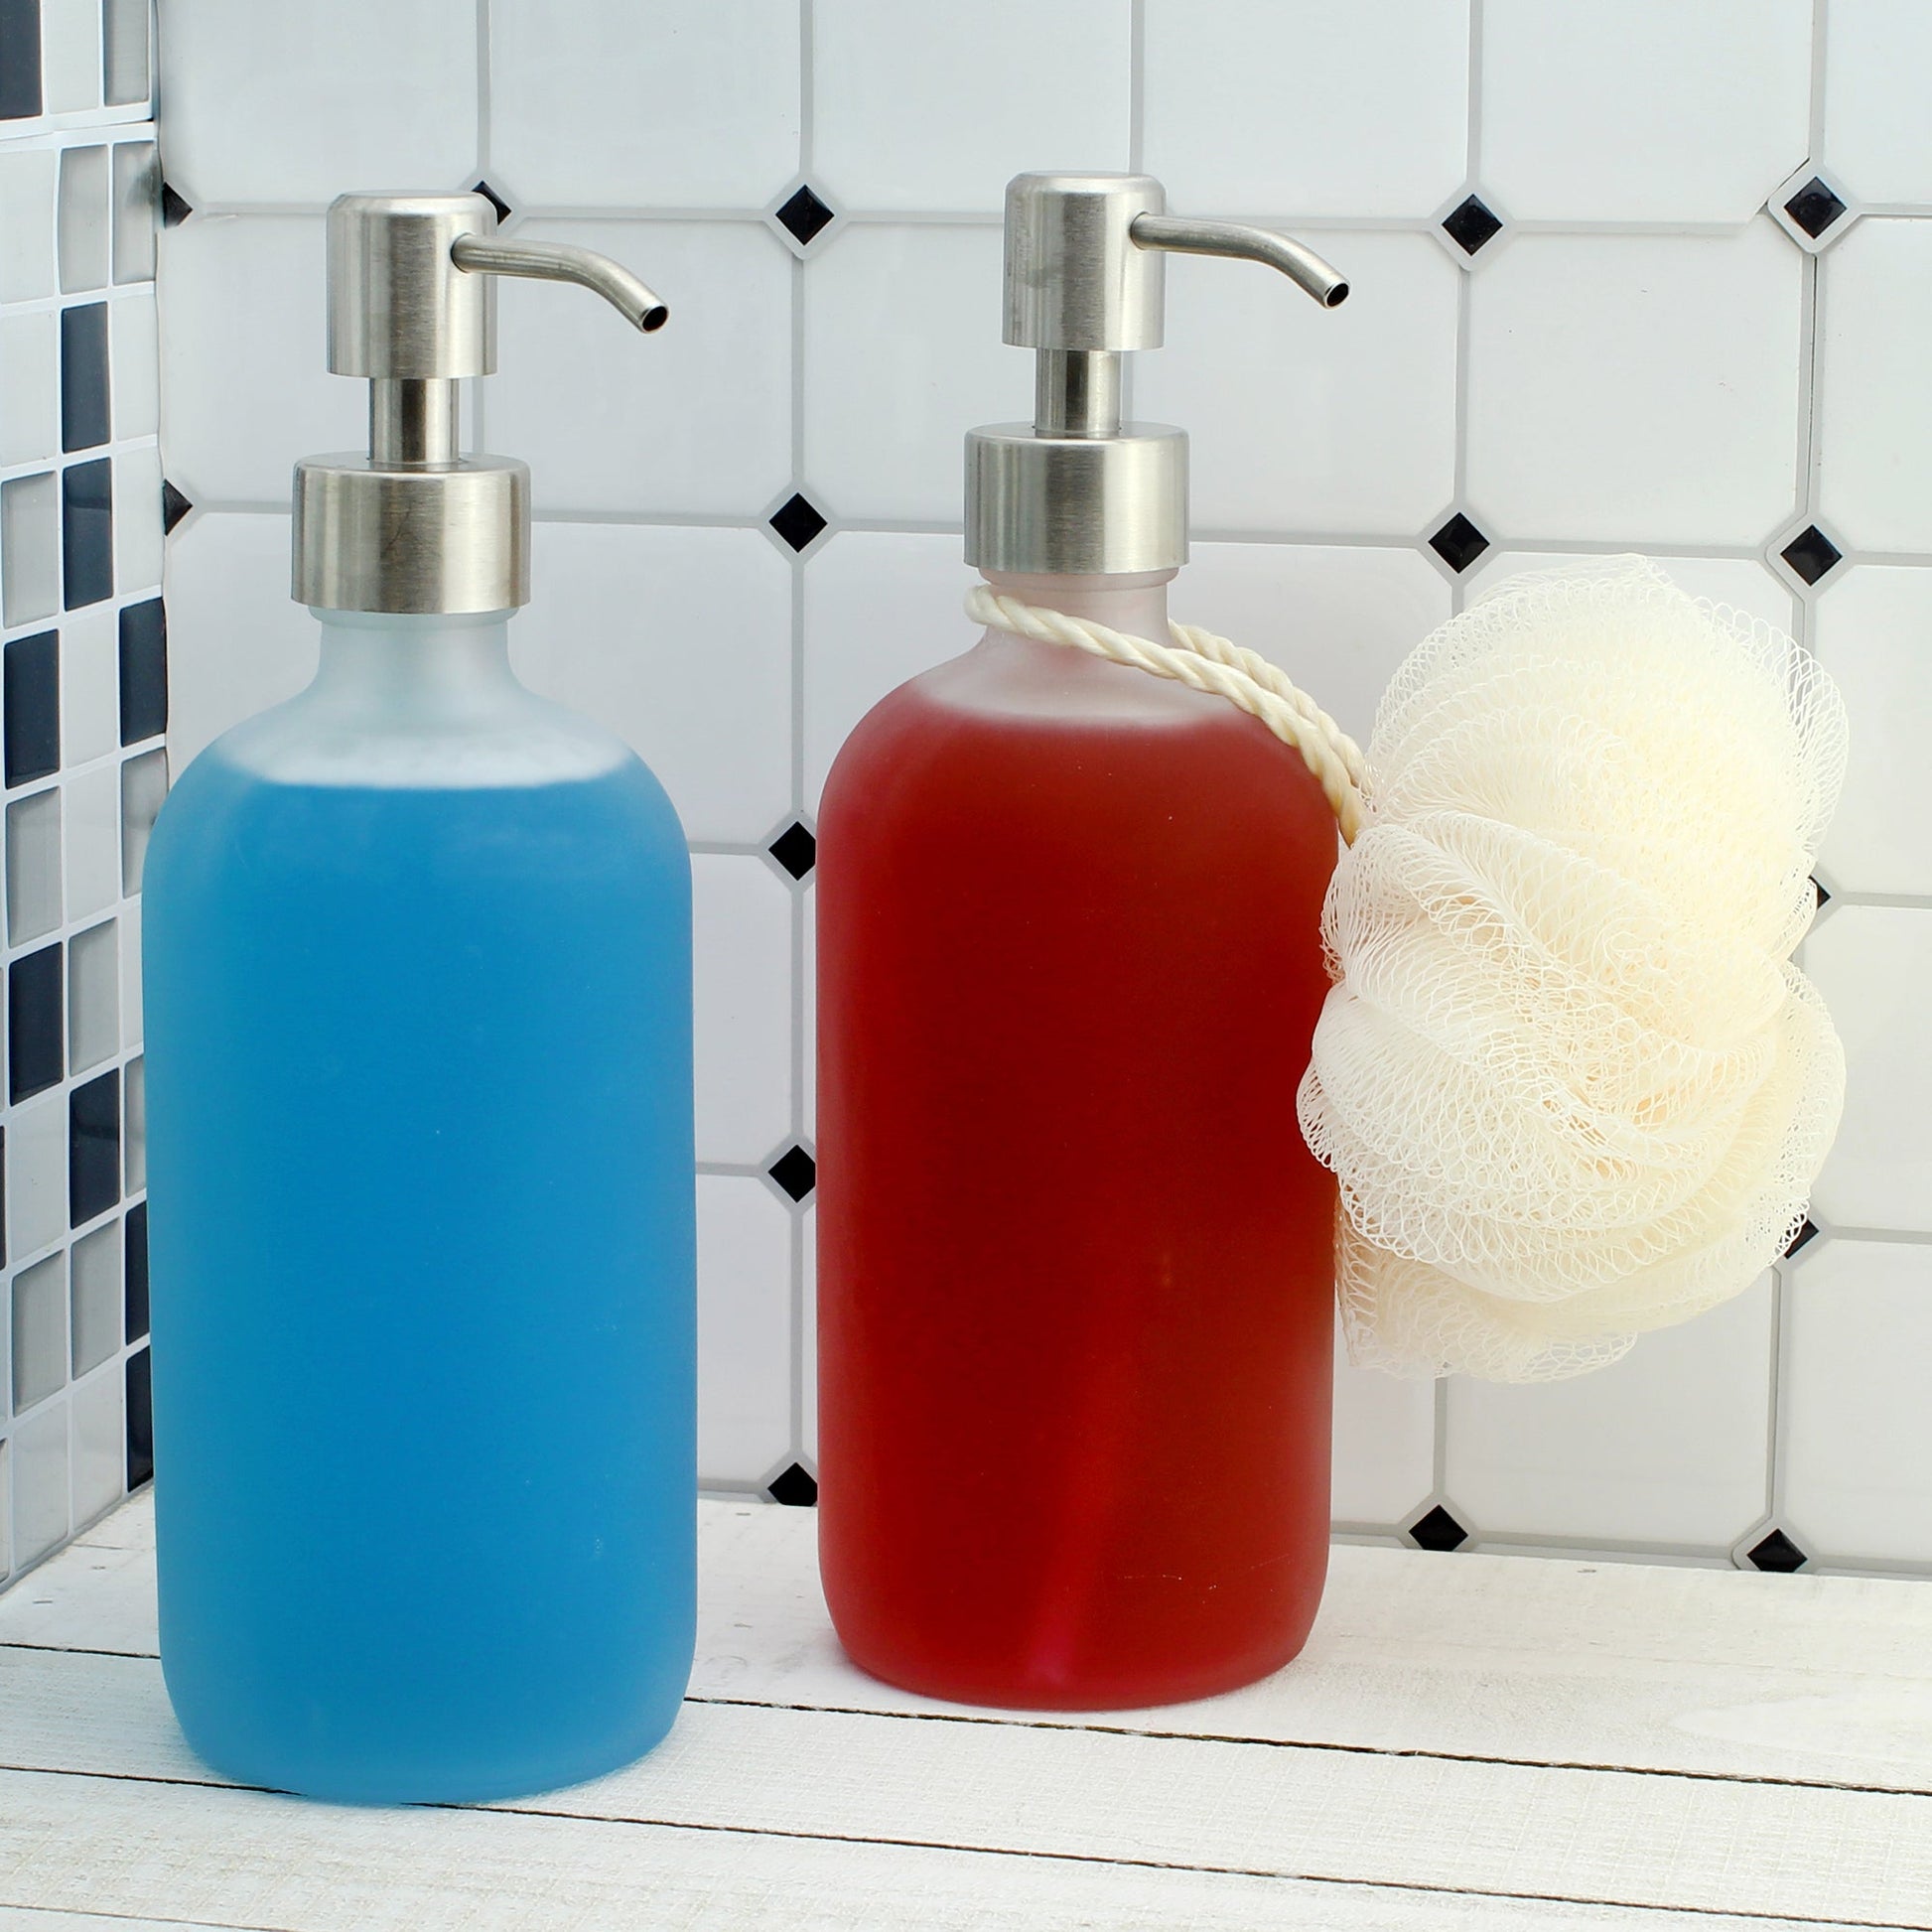 Frosted Glass Soap Dispenser w/Stainless Steel Pumps (16oz, 2-Pack) - sh1497cb0Frost